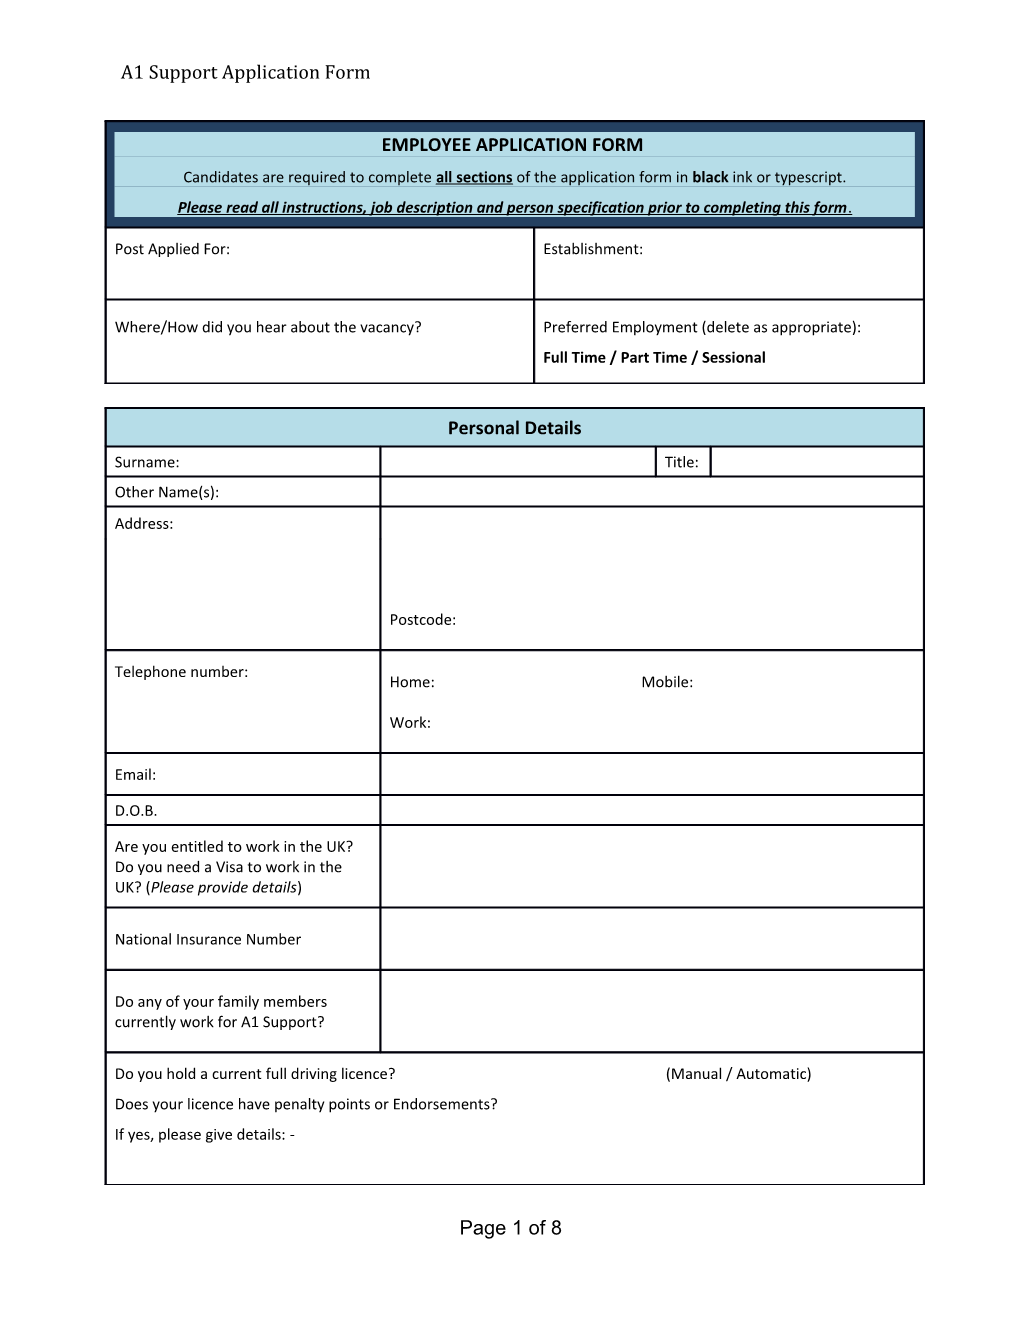 A1 Support Application Form